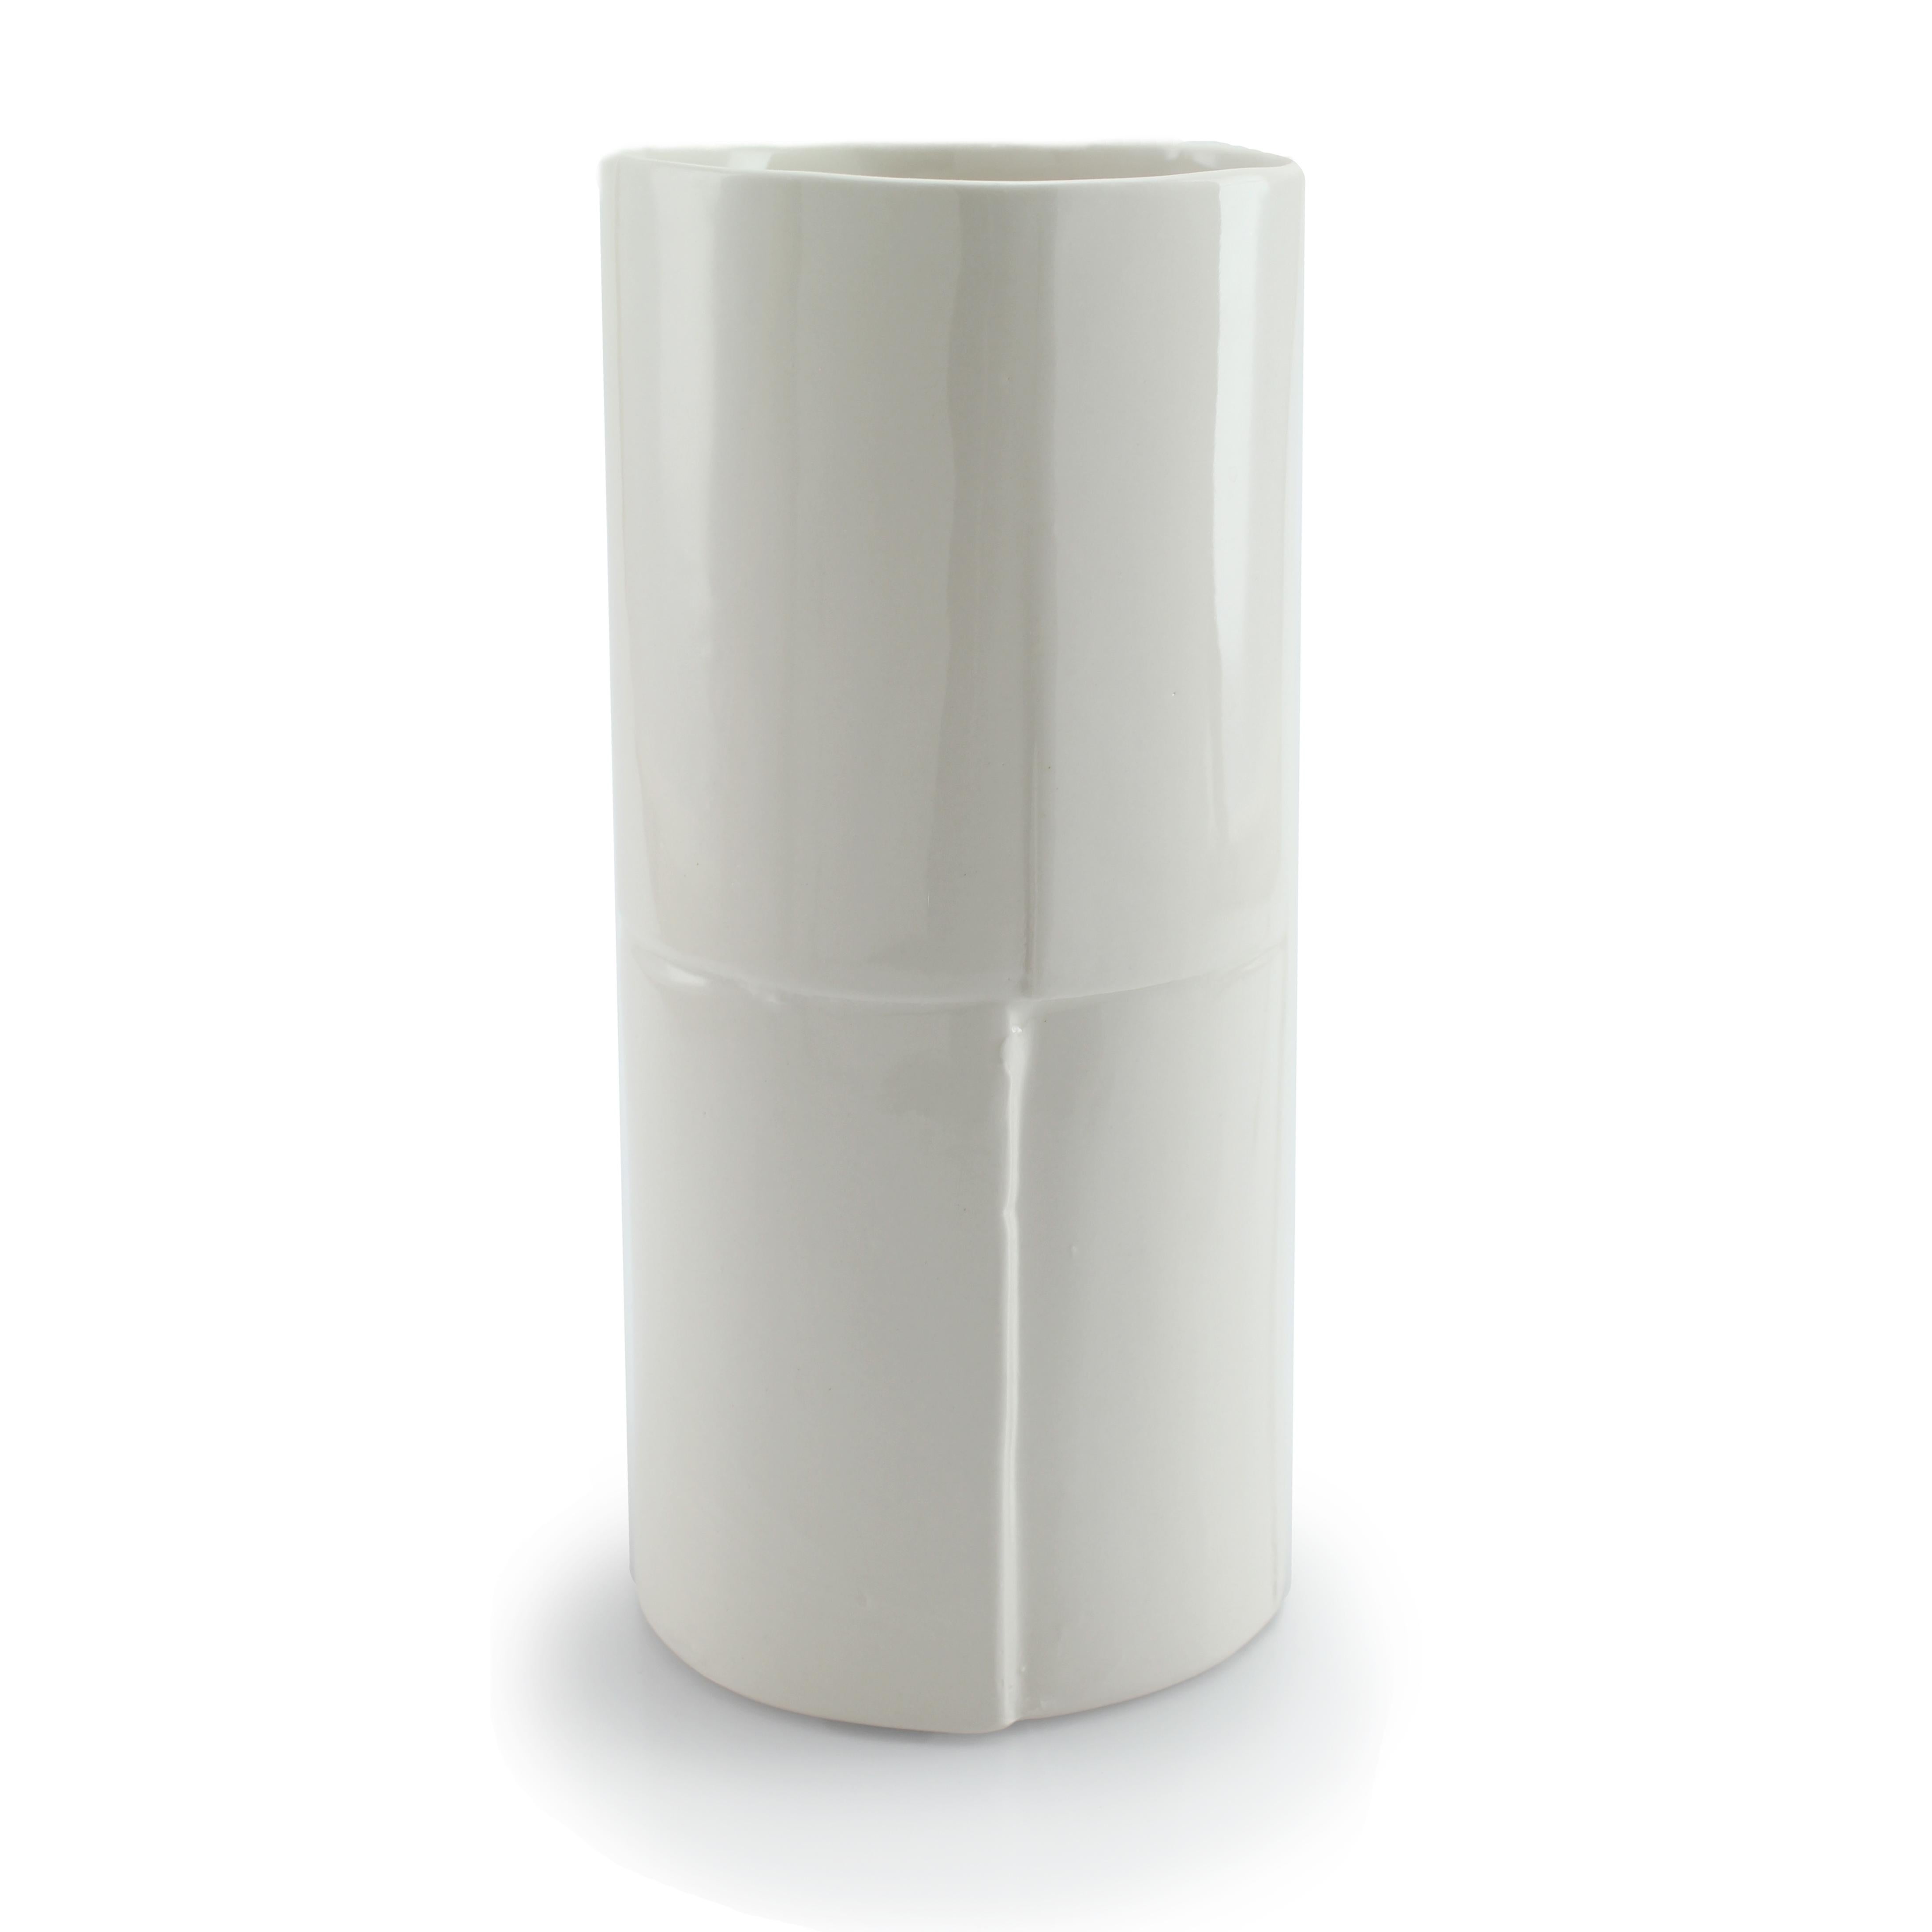 Double Stack Vase Large White Flower Vase Modern Contemporary Glazed Porcelain In New Condition For Sale In Asheville, NC